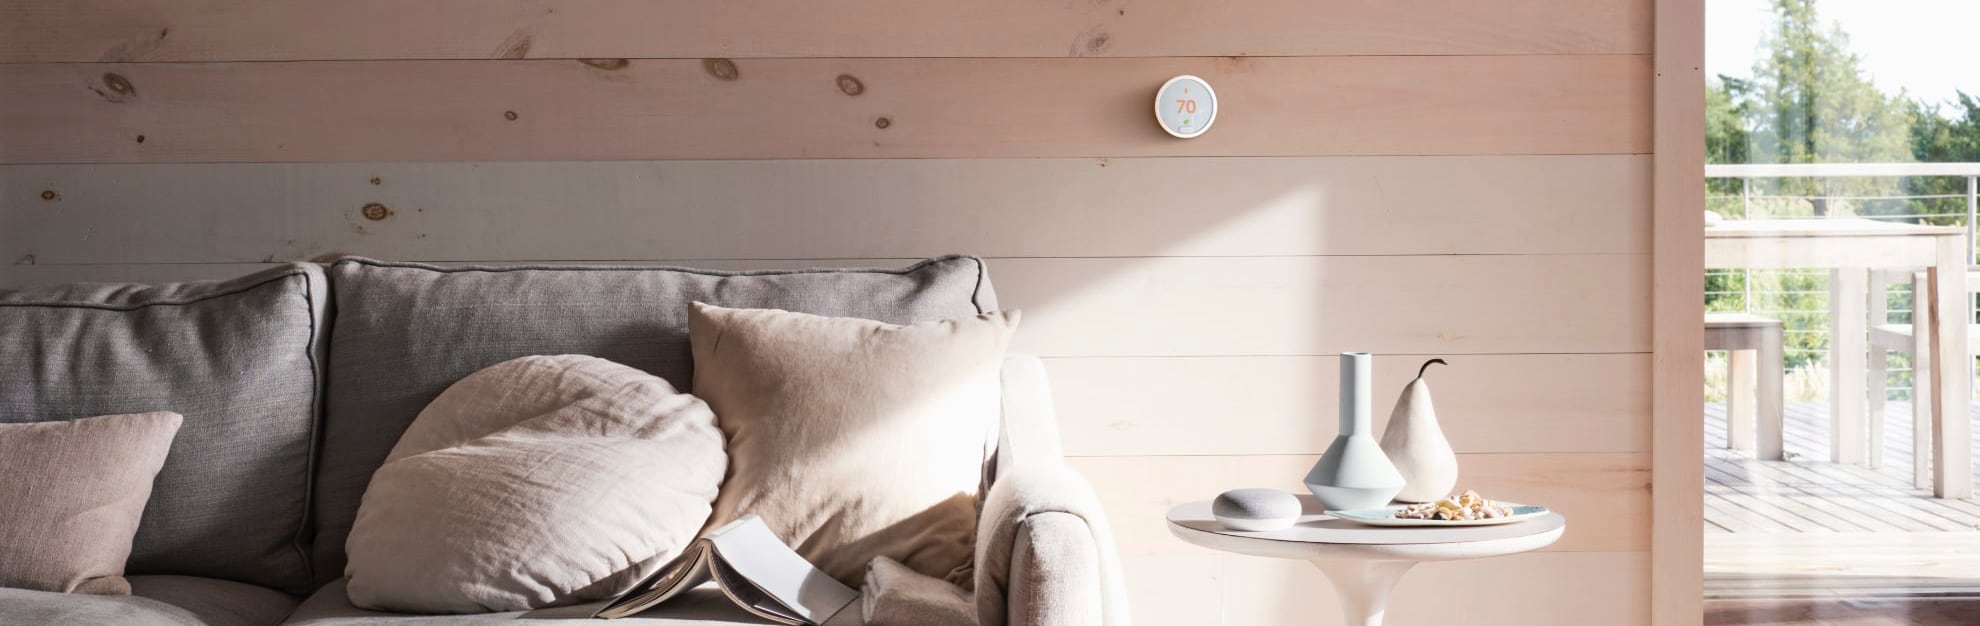 Vivint Home Automation in York